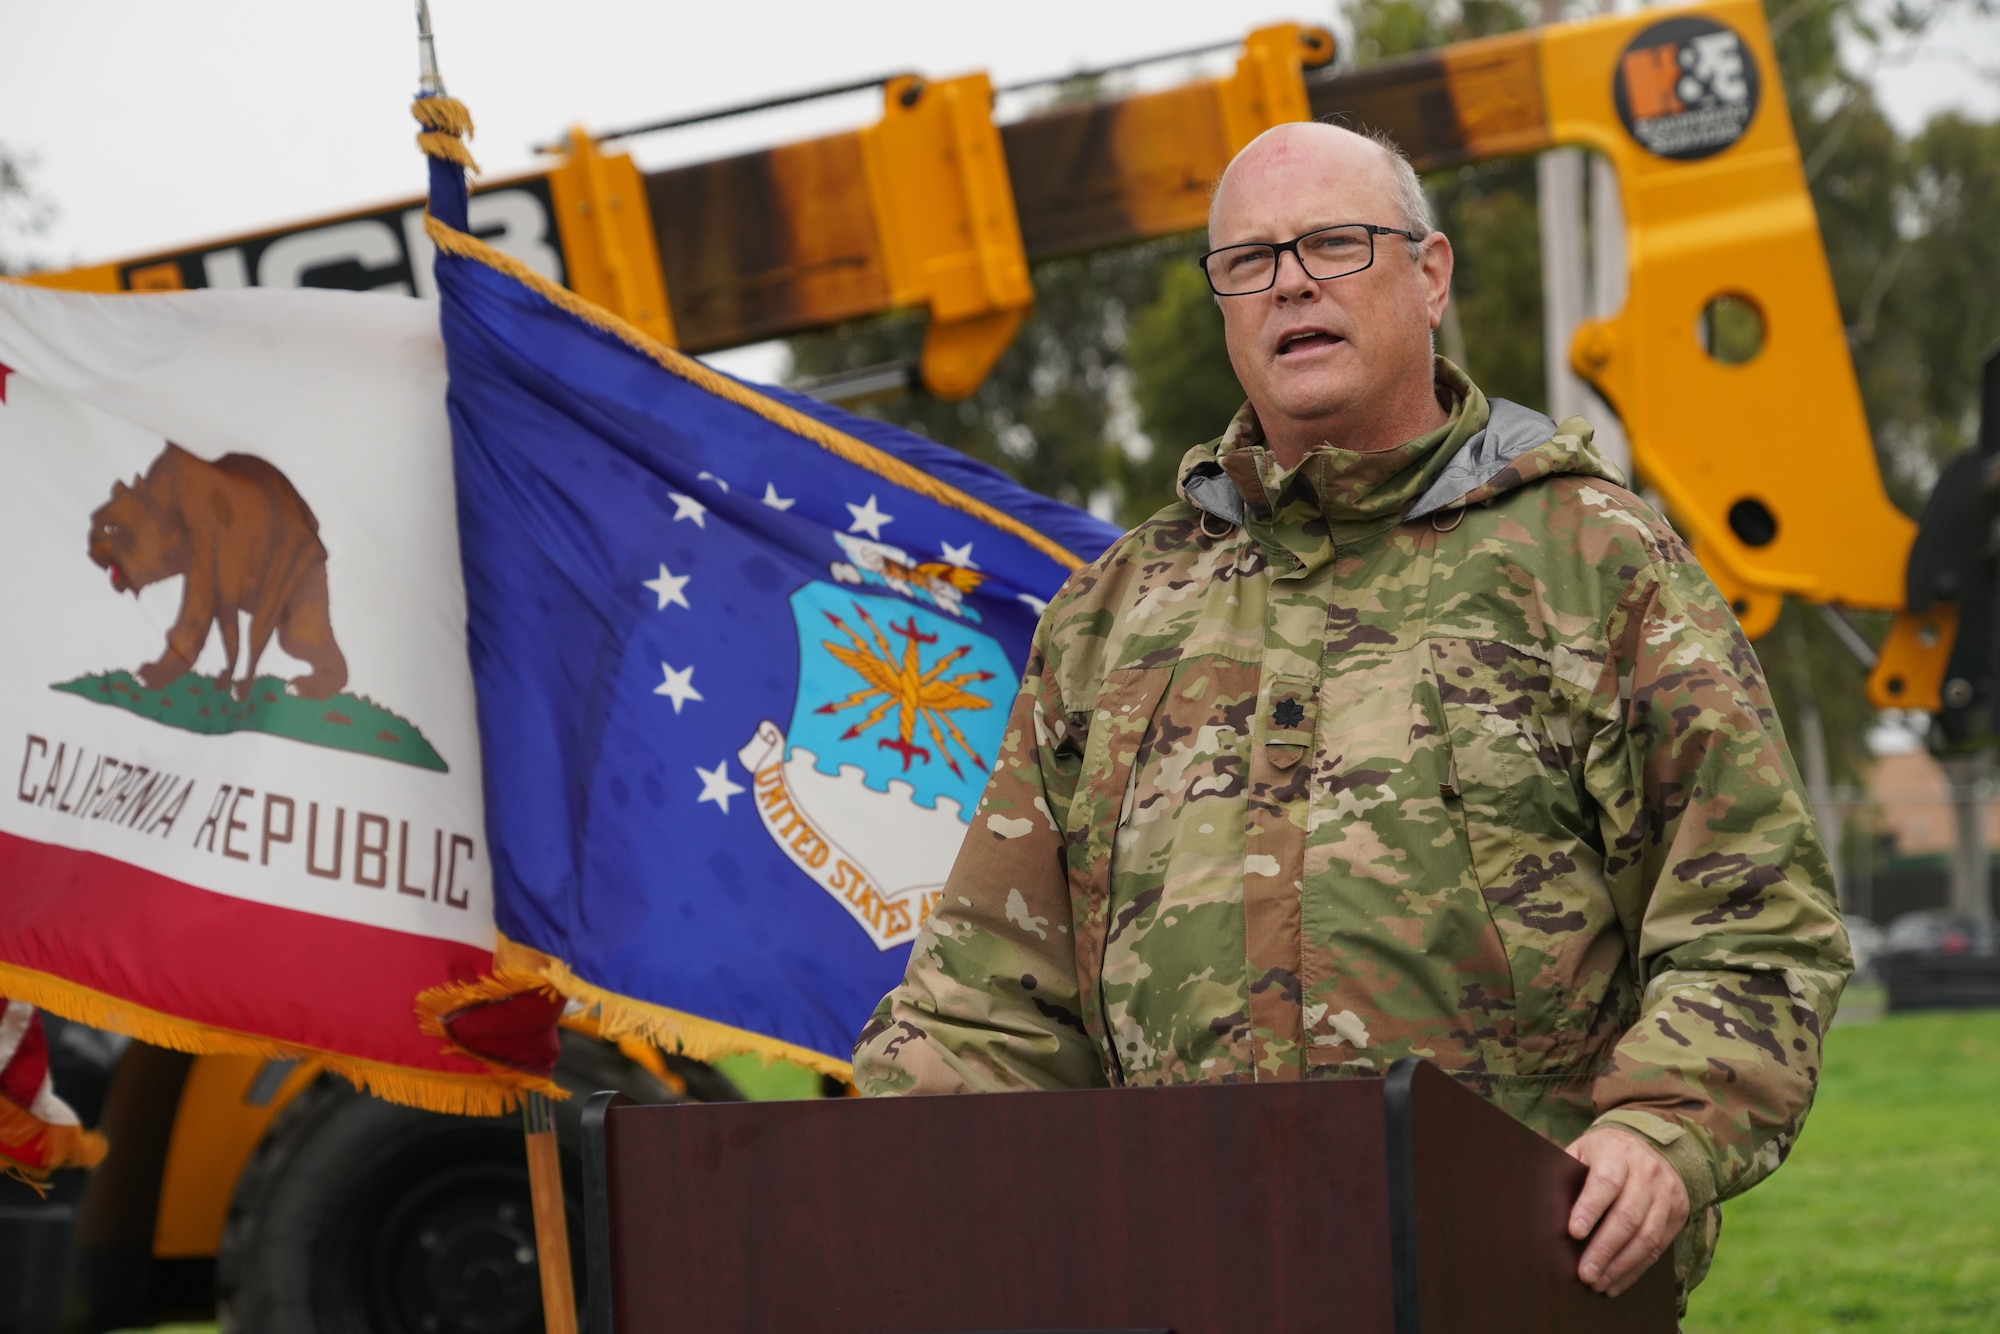 U.S. Air National Guard Lt. Col. John Love, a religious affairs chaplain assigned with the 146th Airlift Wing, delivers an invocation prayer during a groundbreaking ceremony celebrating the beginning phases of construction for the wing's new C-130J simulator at the Channel Islands Air National Guard Station, Port Hueneme, California, Jan. 5, 2023. The new simulator or Weapons System Trainer Reconfigurable C-130J flight simulator (also known as WST 12R) will showcase a myriad of capabilities that will separate it from other simulators across the United States. (U.S. Air National Guard photo by Staff Sgt. Michelle Ulber)